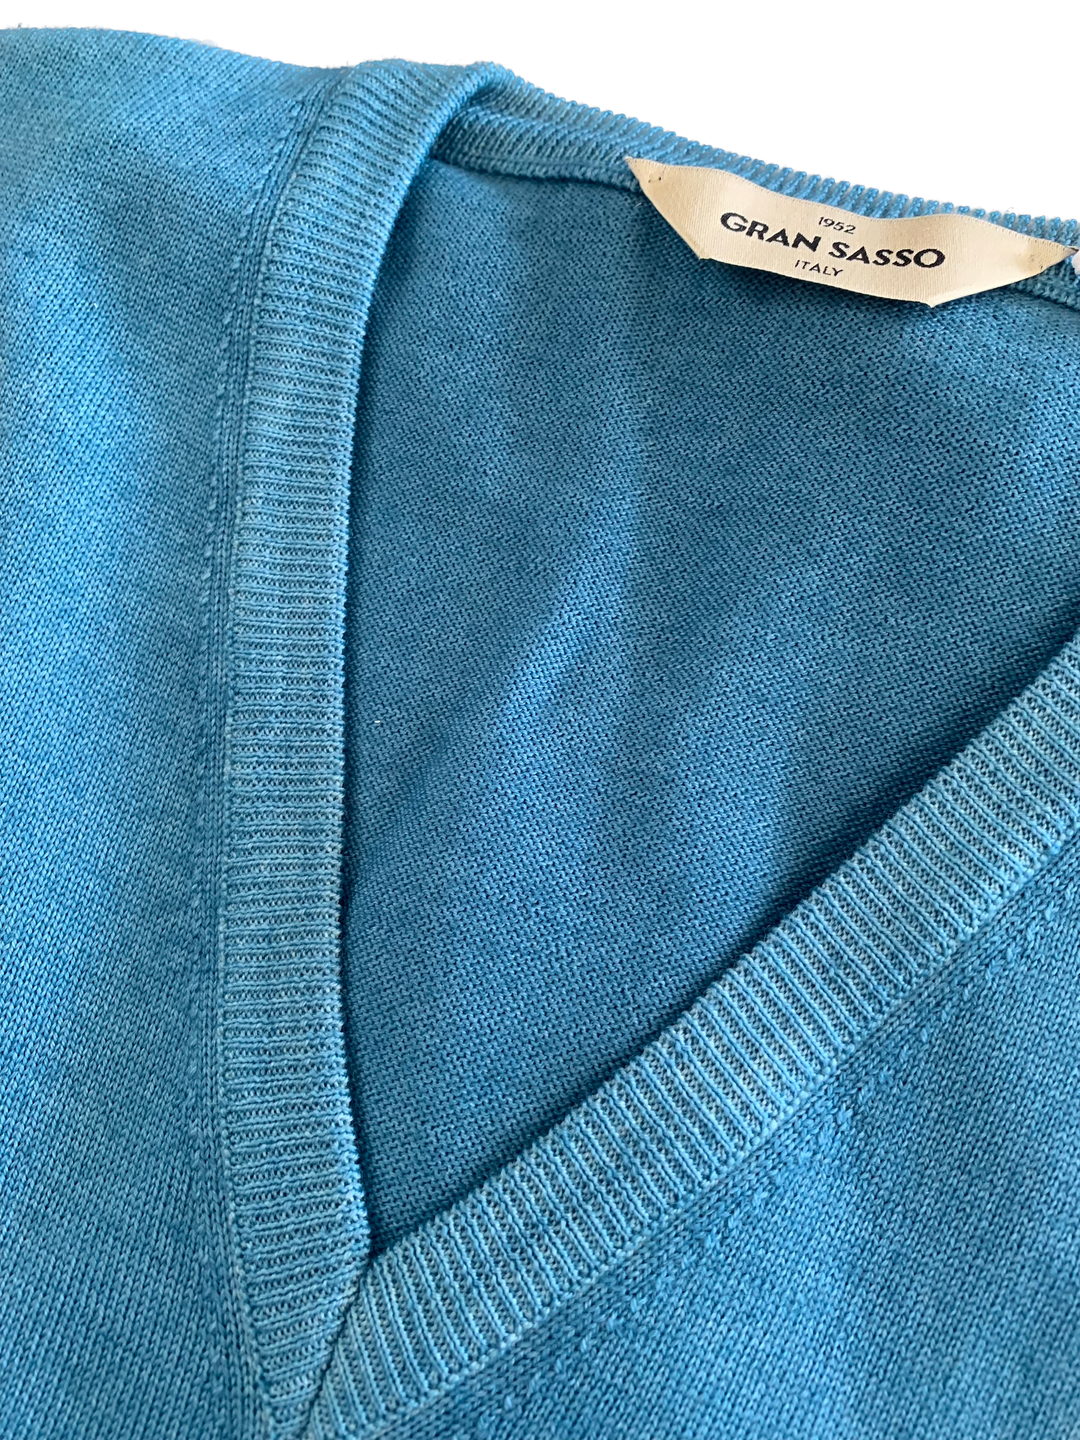 Gran Sasso - Vintage Merino V-Neck Knit in Turquoise | Buster McGee